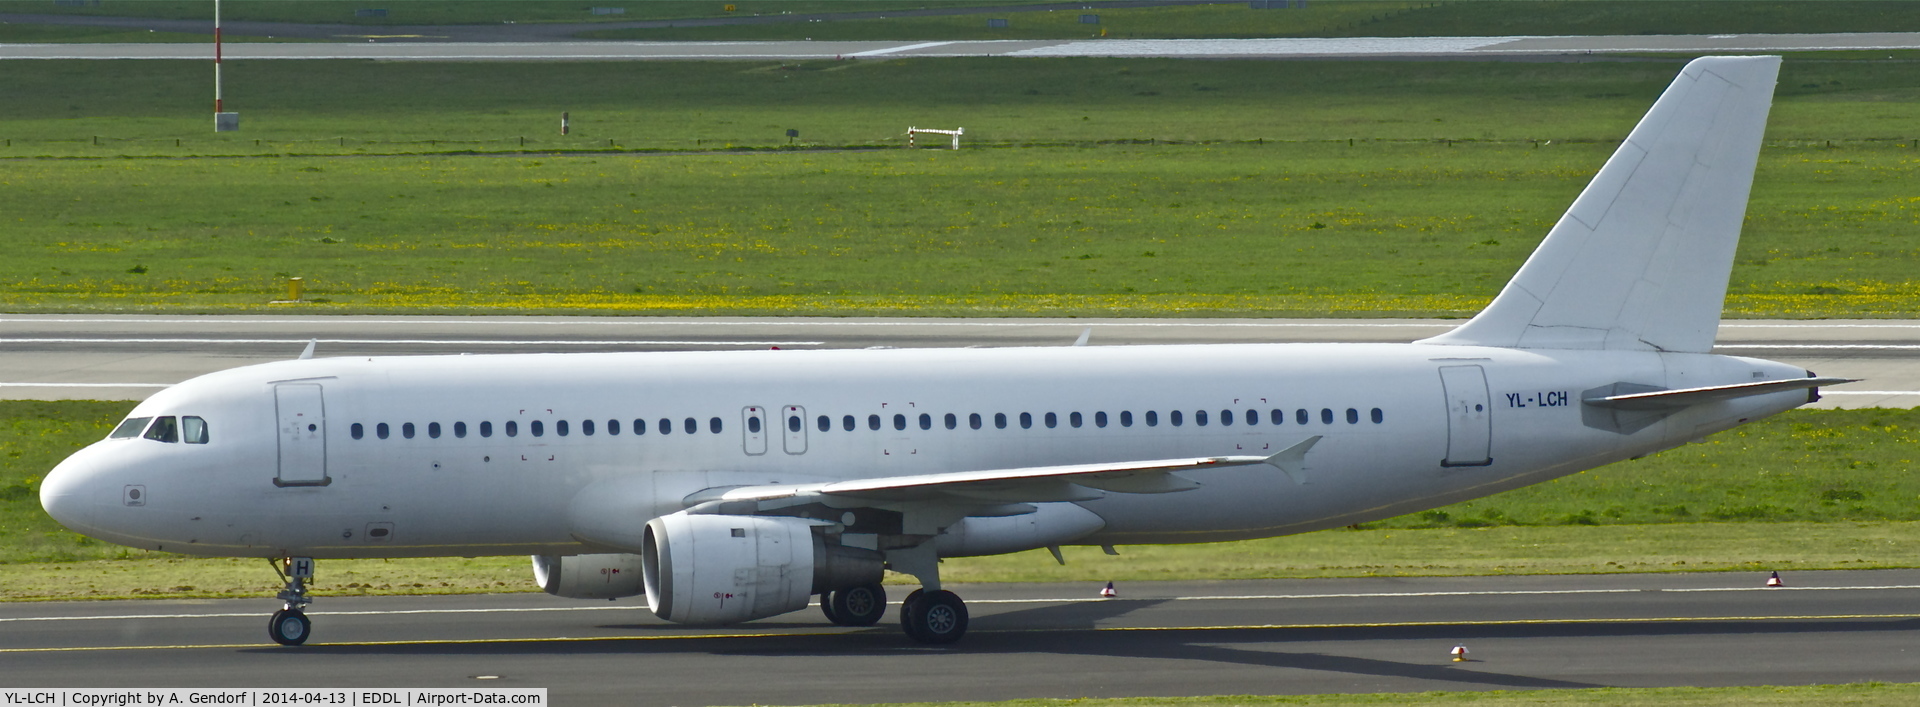 YL-LCH, 1992 Airbus A320-211 C/N 426, Smart Lynx (untitled), is here at Düsseldorf Int'l(EDDL) shortly after landing